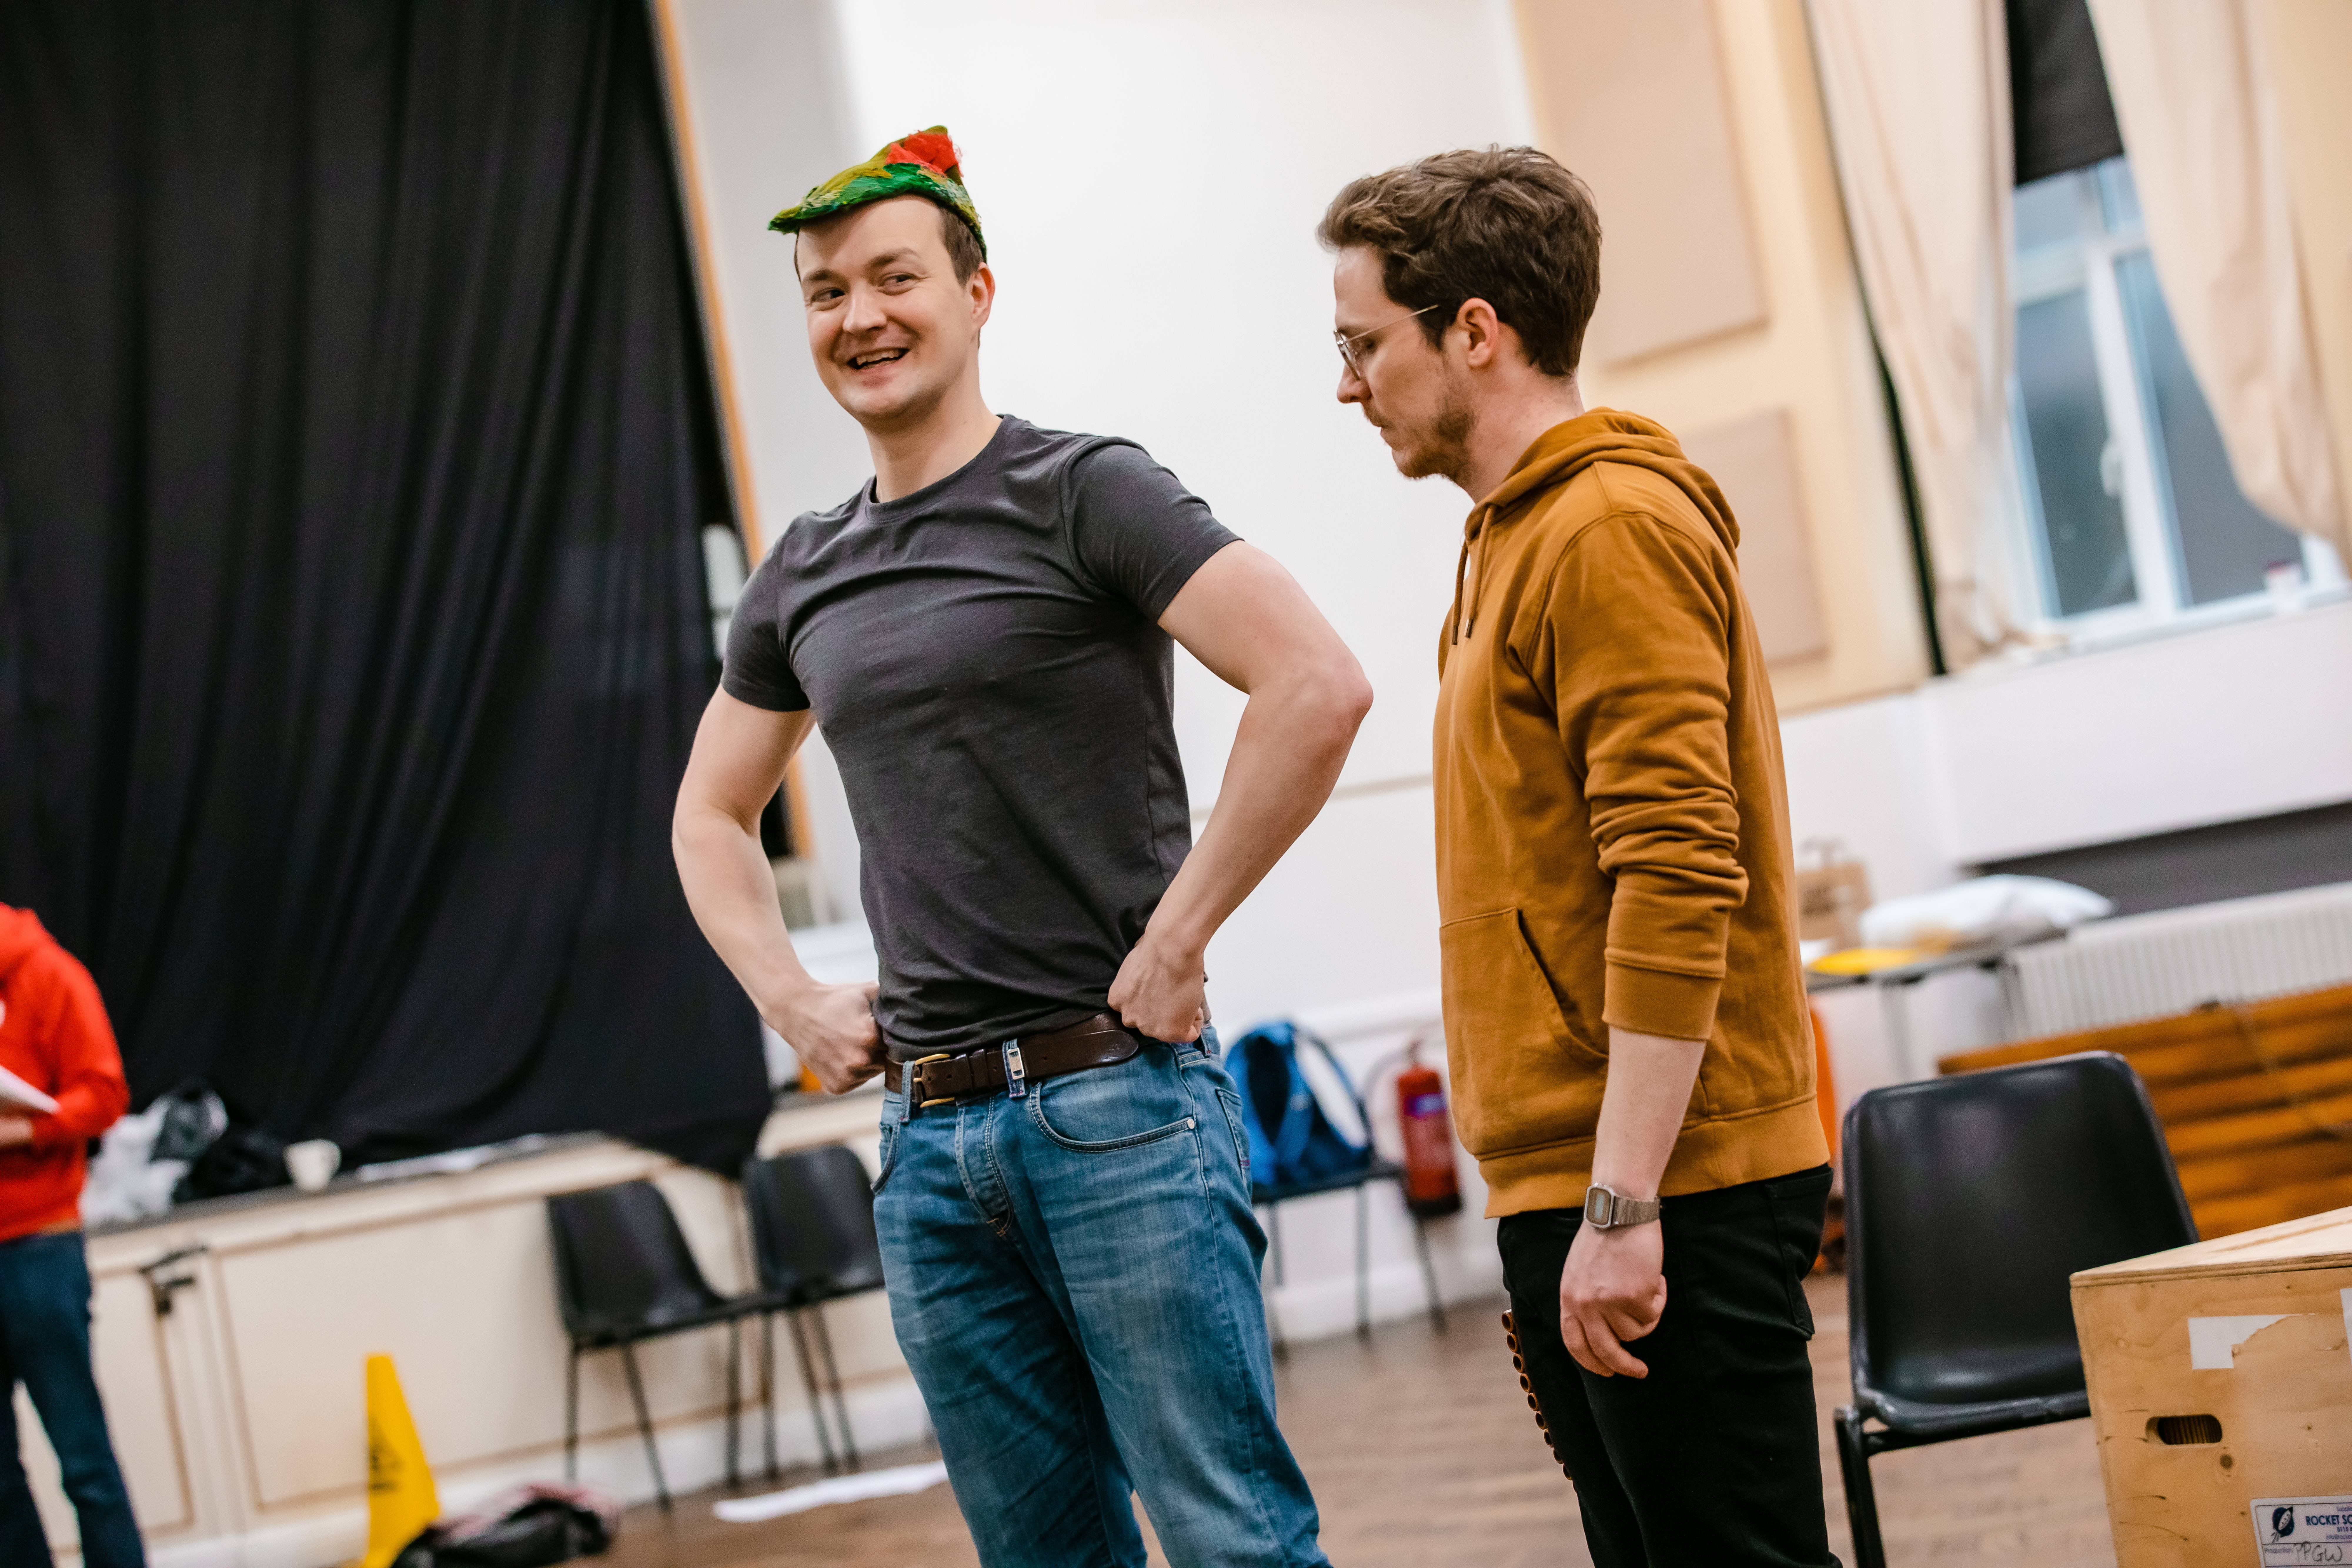 Greg Tannahill and Matthew Cavendish in rehearsals for Peter Pan Goes Wrong. Photo by Danny Kaan.